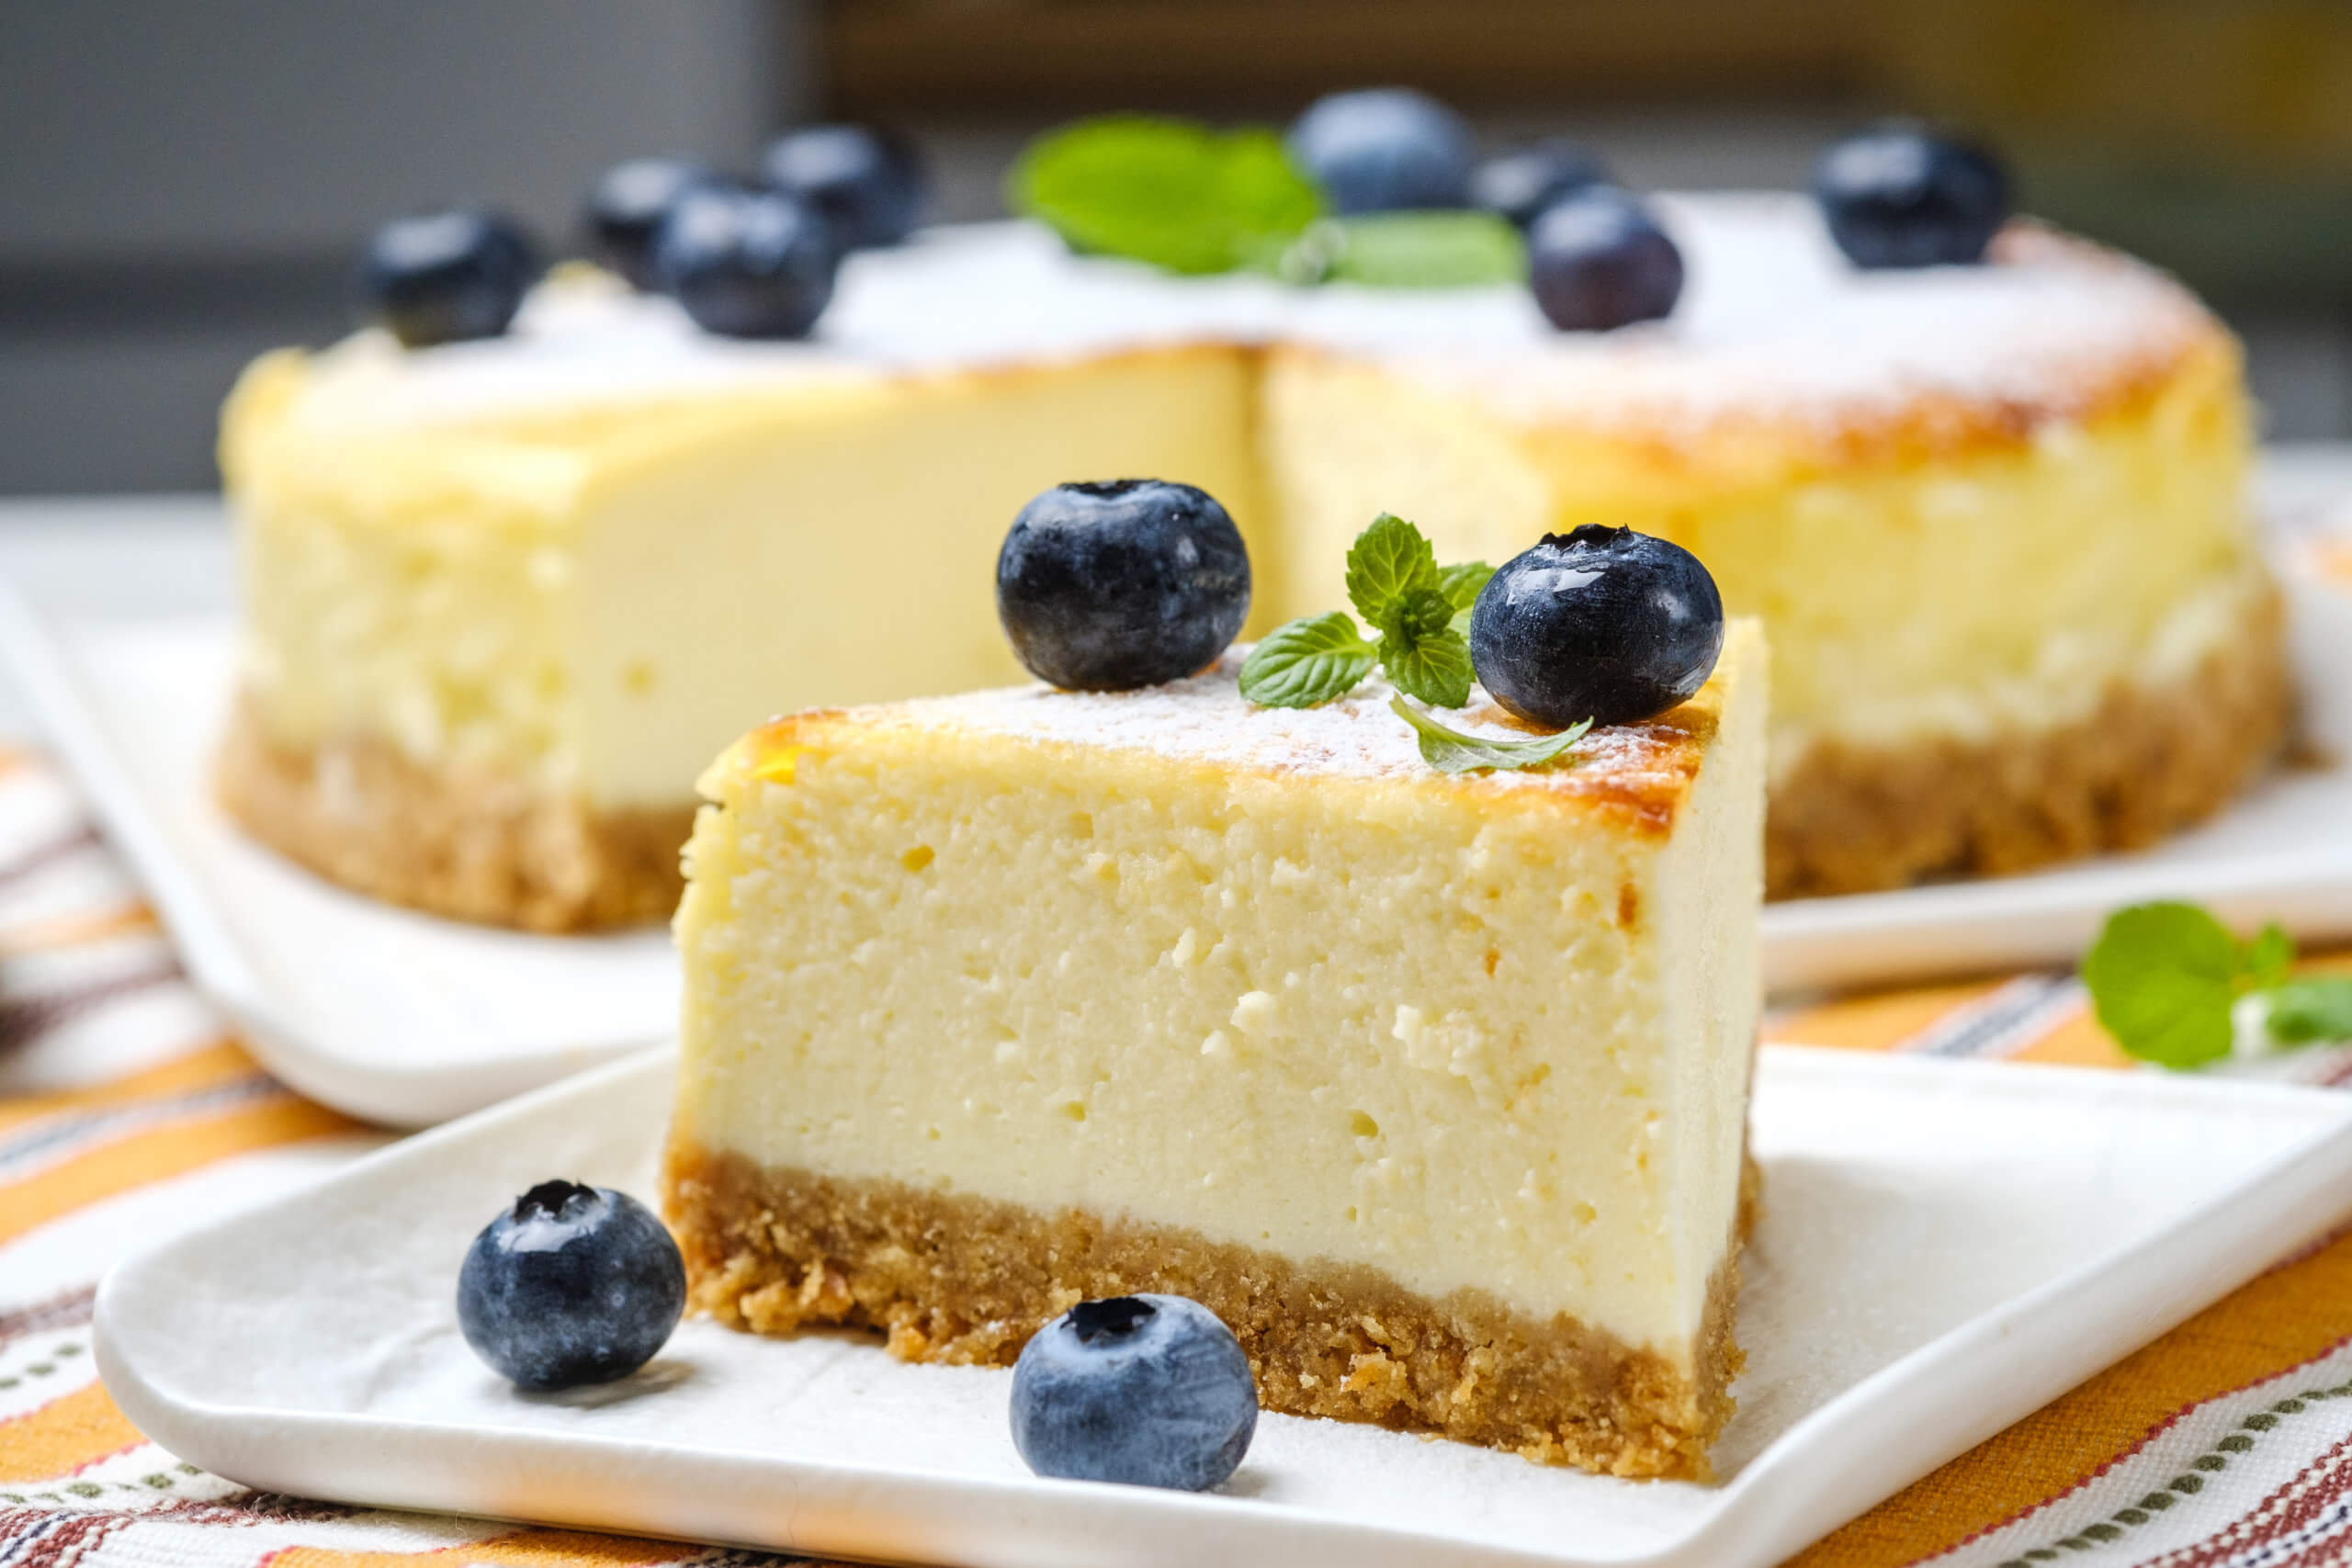 Cheesecake: The taste can range from sweet to highly tangy. 2560x1710 HD Wallpaper.